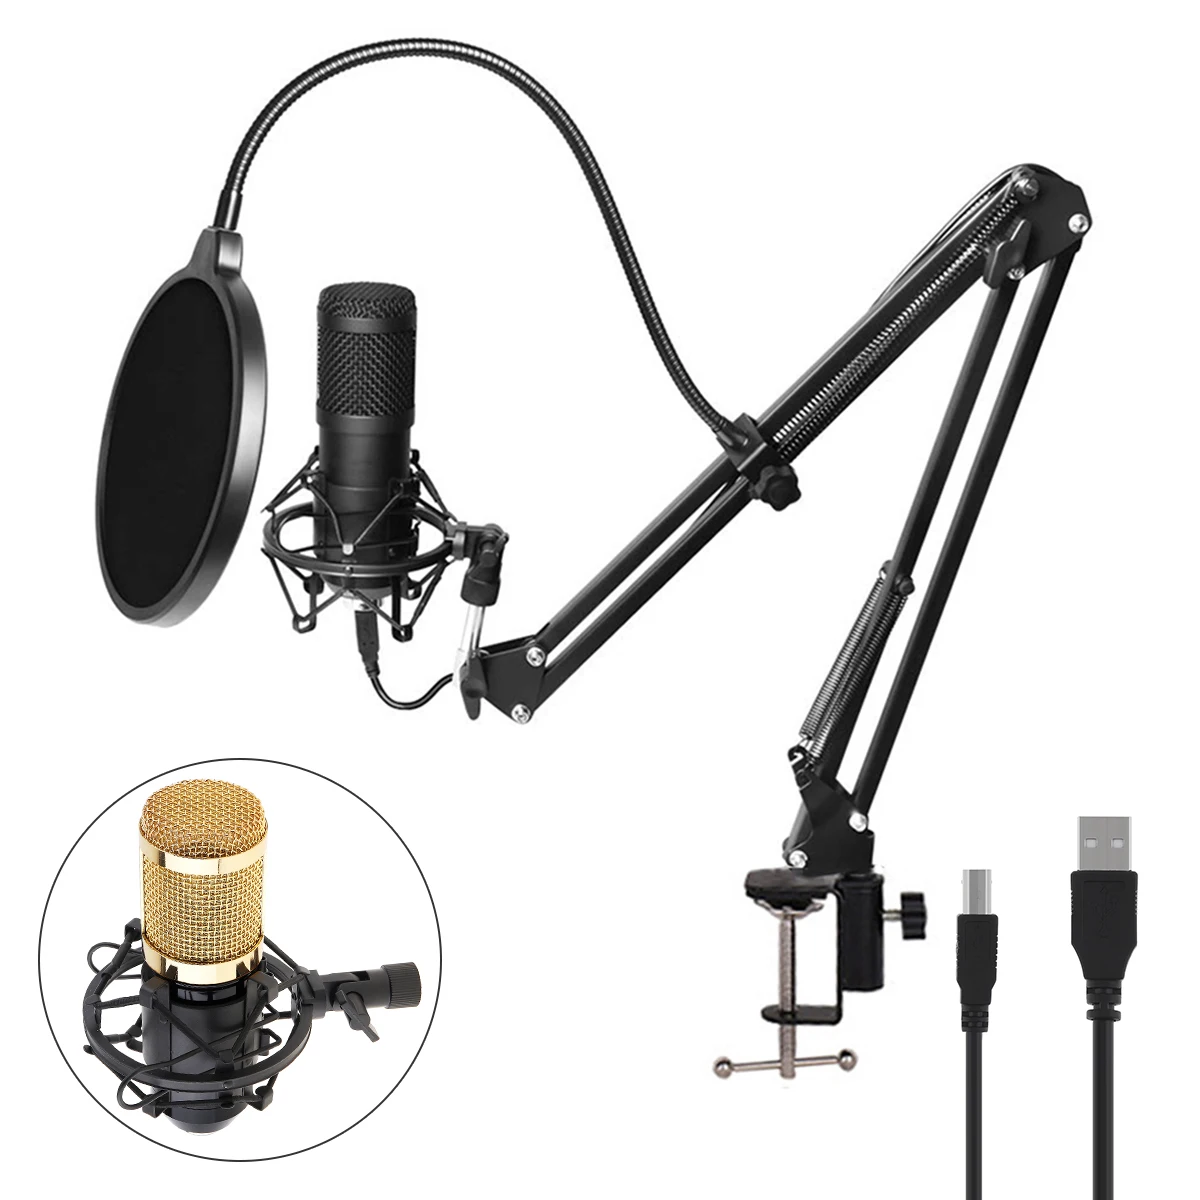 

BM-800 USB Condenser Microphone 192KHz / 24Bit Microphone Kits for Computer Karaoke Microphone for Sound / Recording / Live